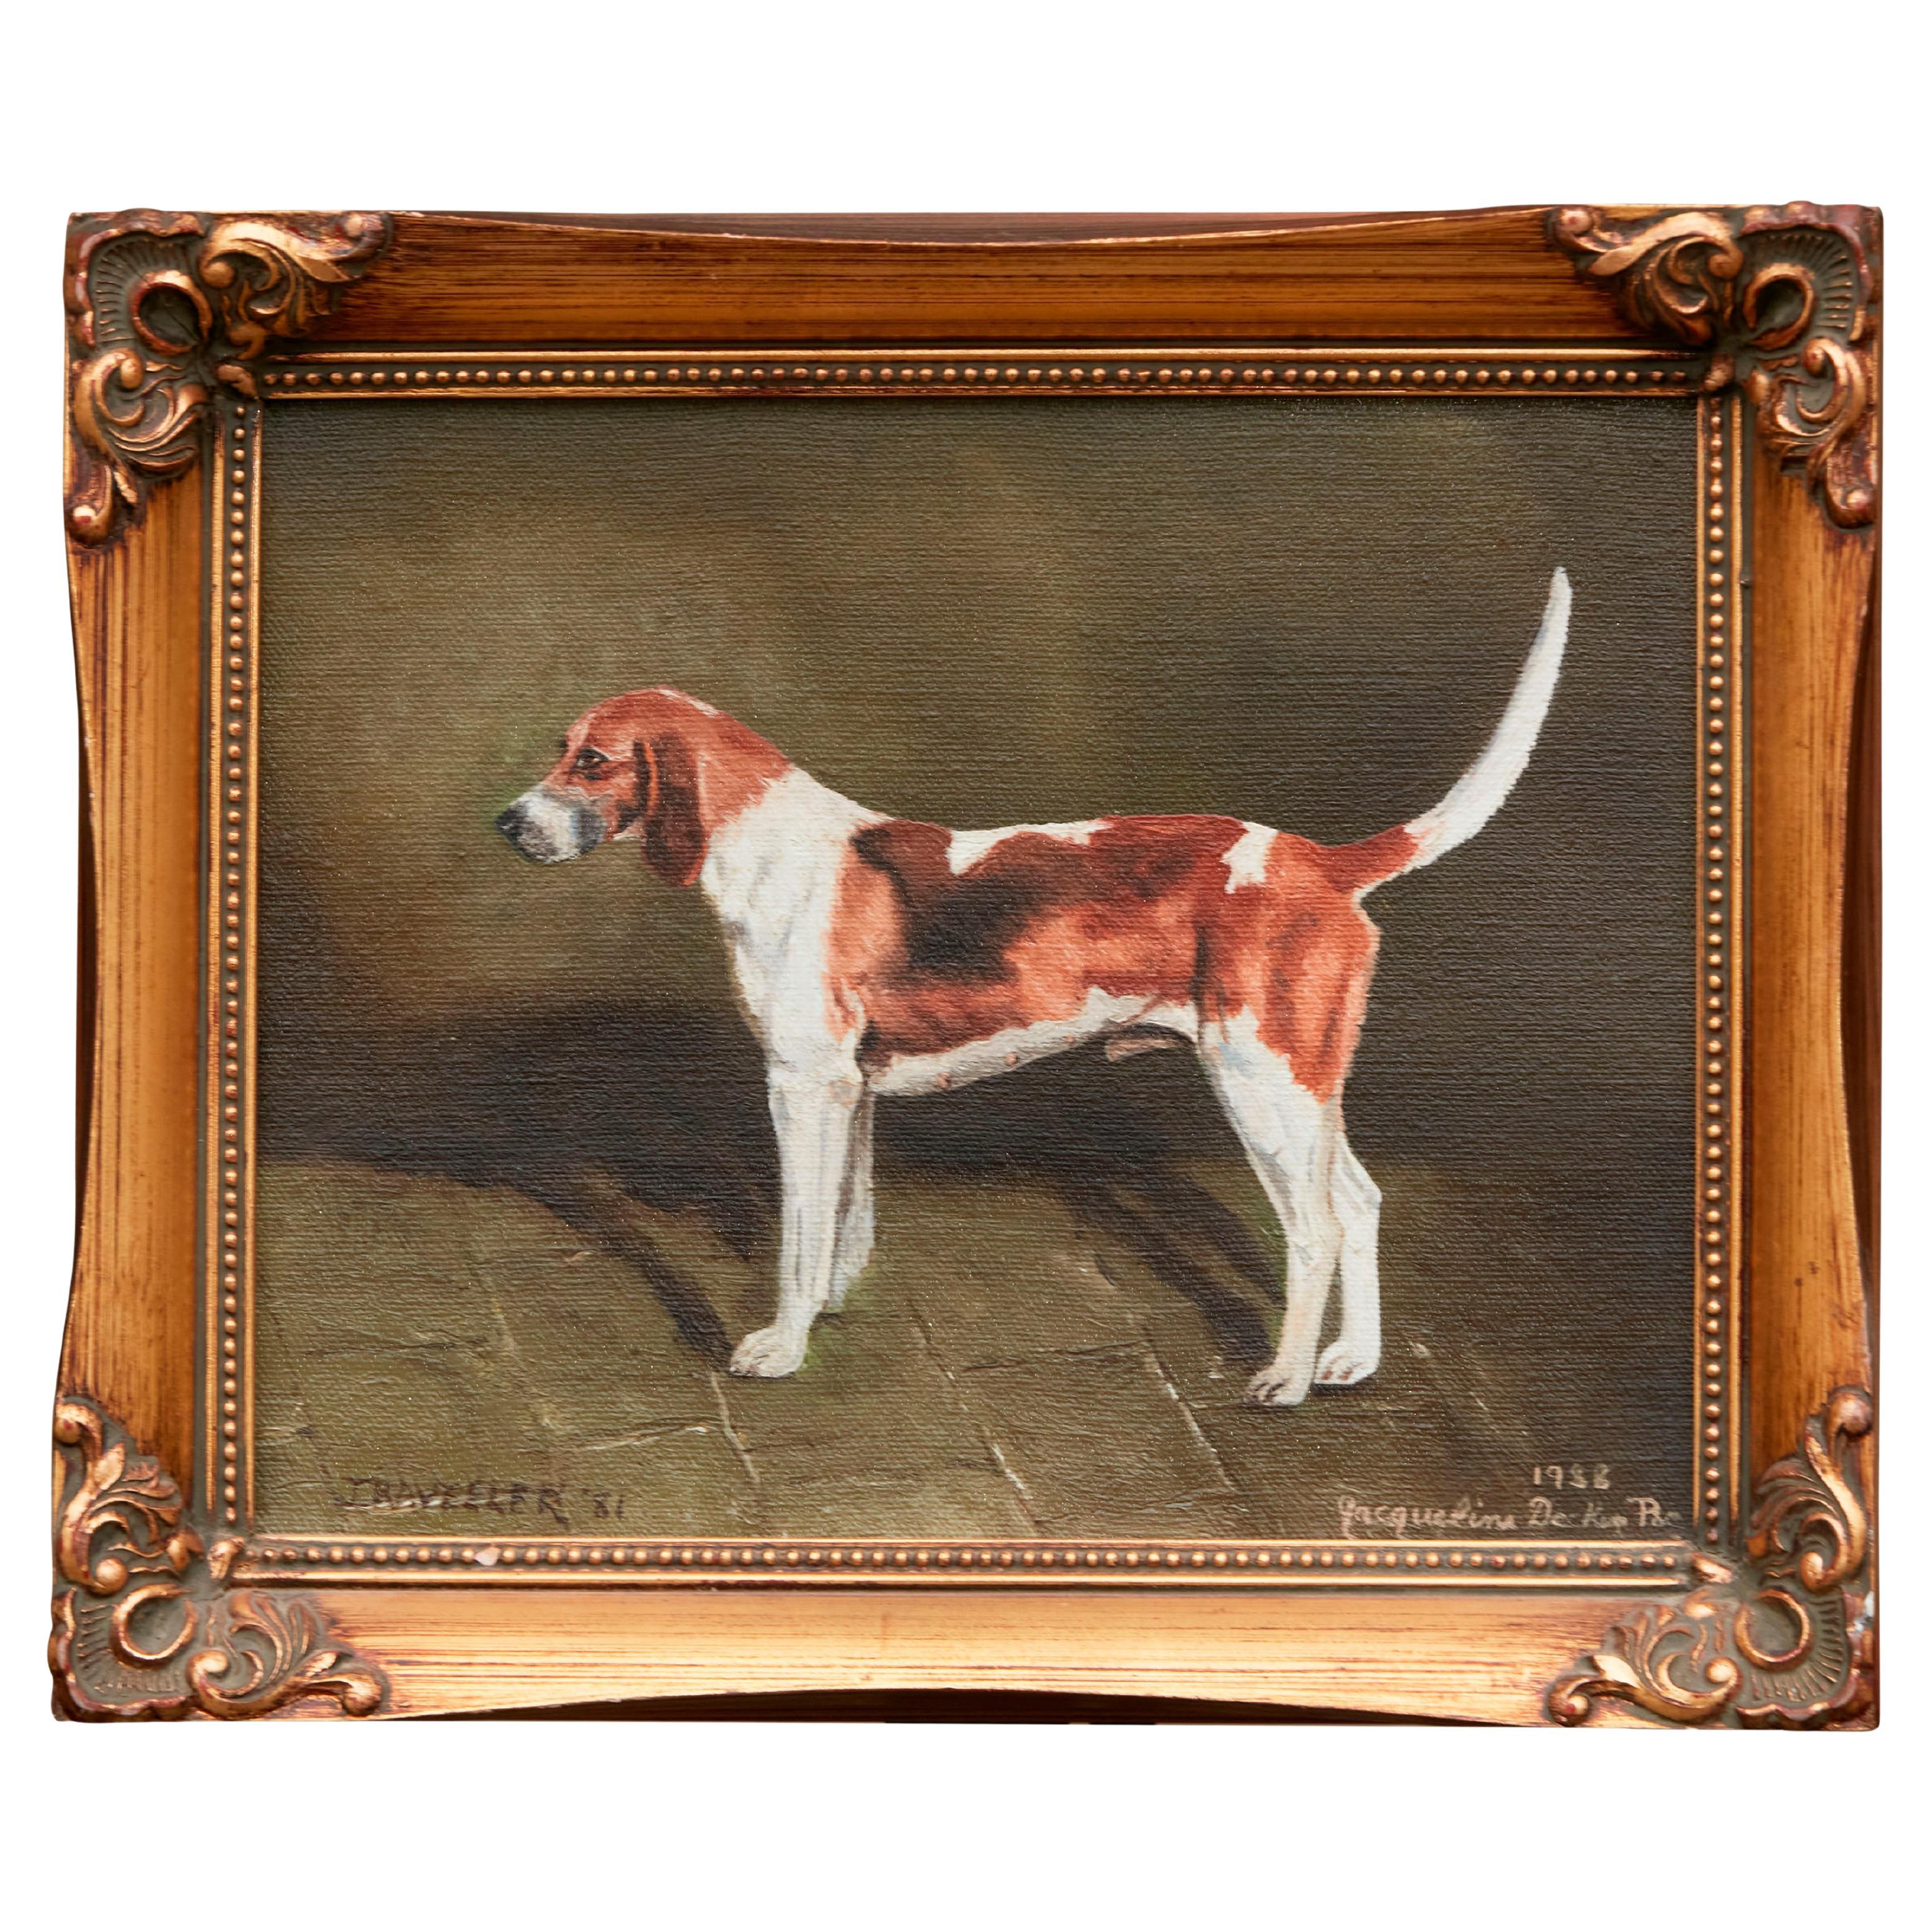 Oil on Canvas Dog Painting Depicting a Belvoir Hound, Signed Jacqueline Decker